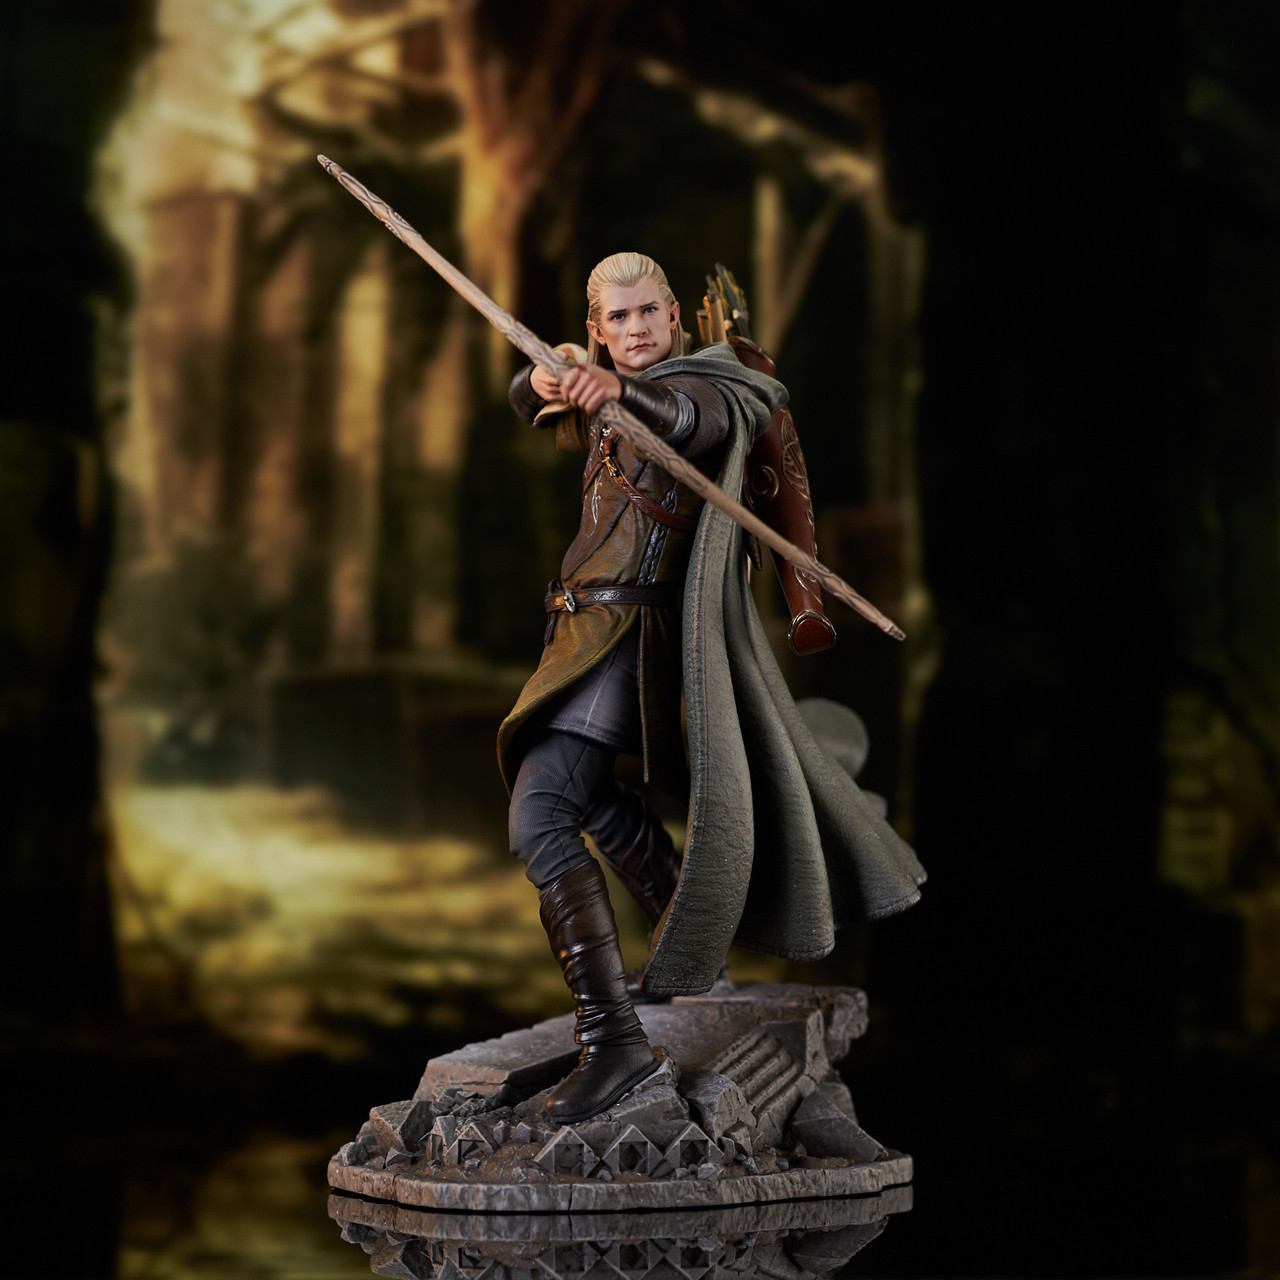 Pre-Order Diamond Gallery Lord of the Rings Legolas Deluxe Statue